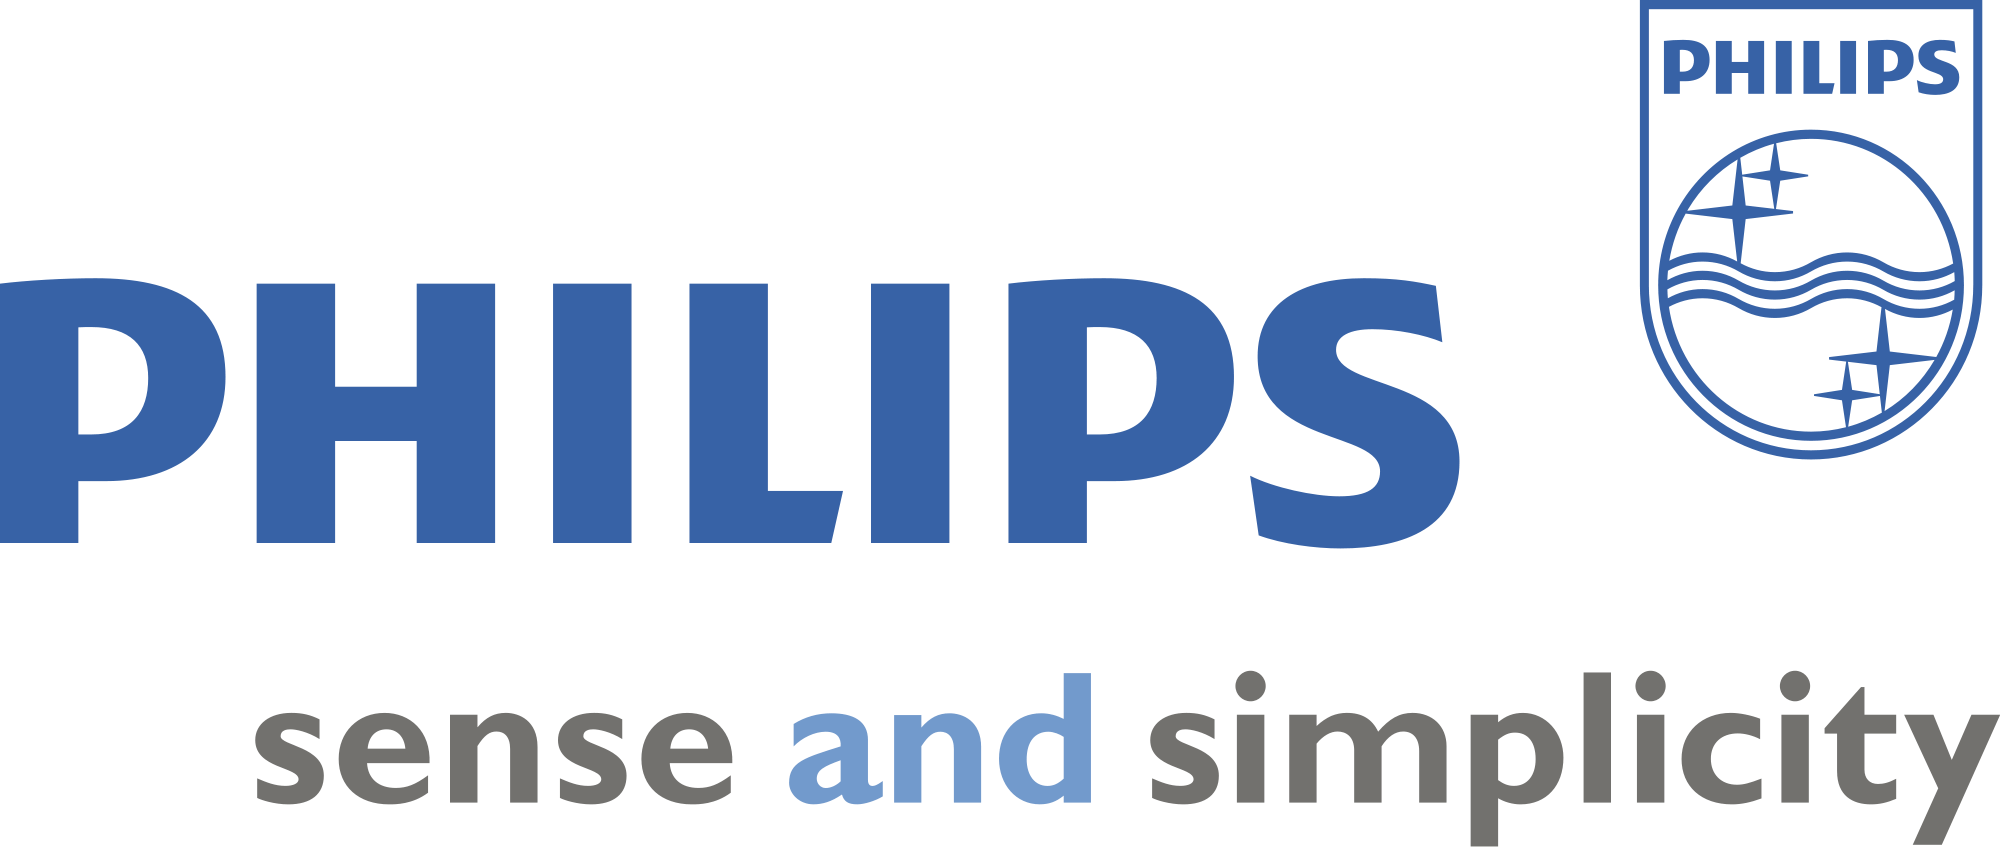 New Philips Shield Logo - File:Philips sense and simplicity with Shield.svg - Wikimedia Commons